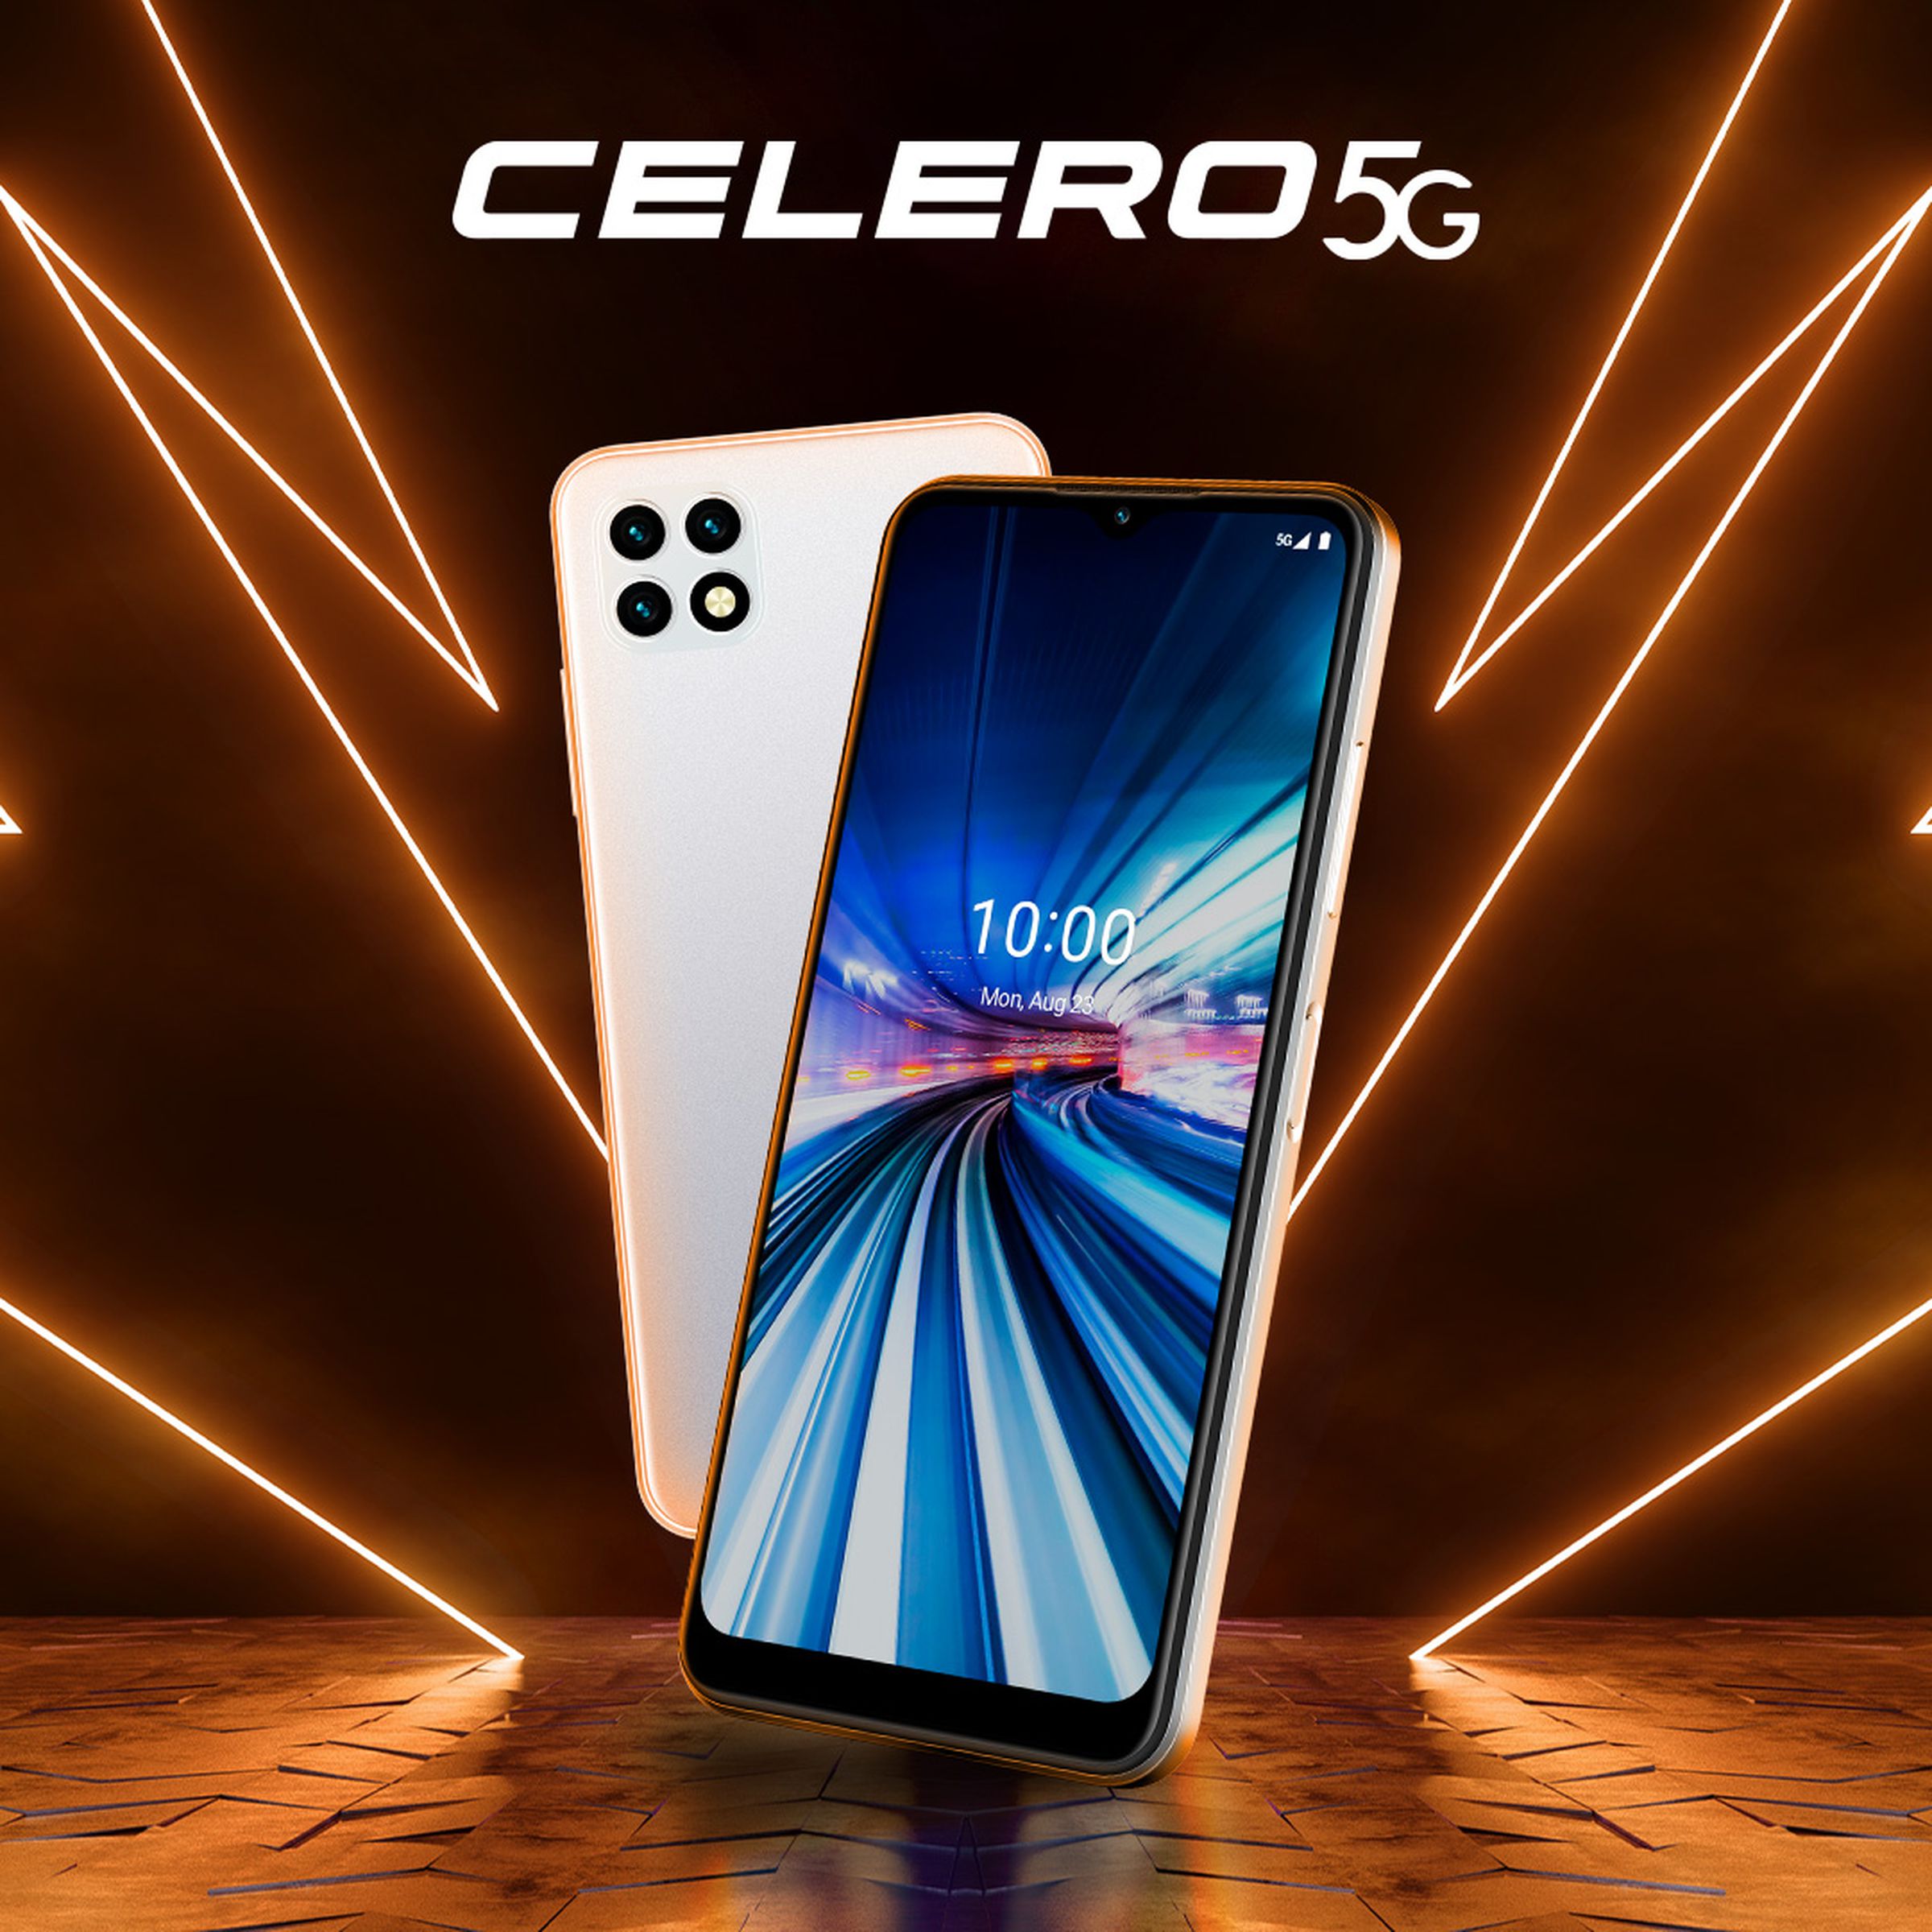 DISH and Boost Mobile hope to bring in new 5G customers with their own phone, the Celero5G.